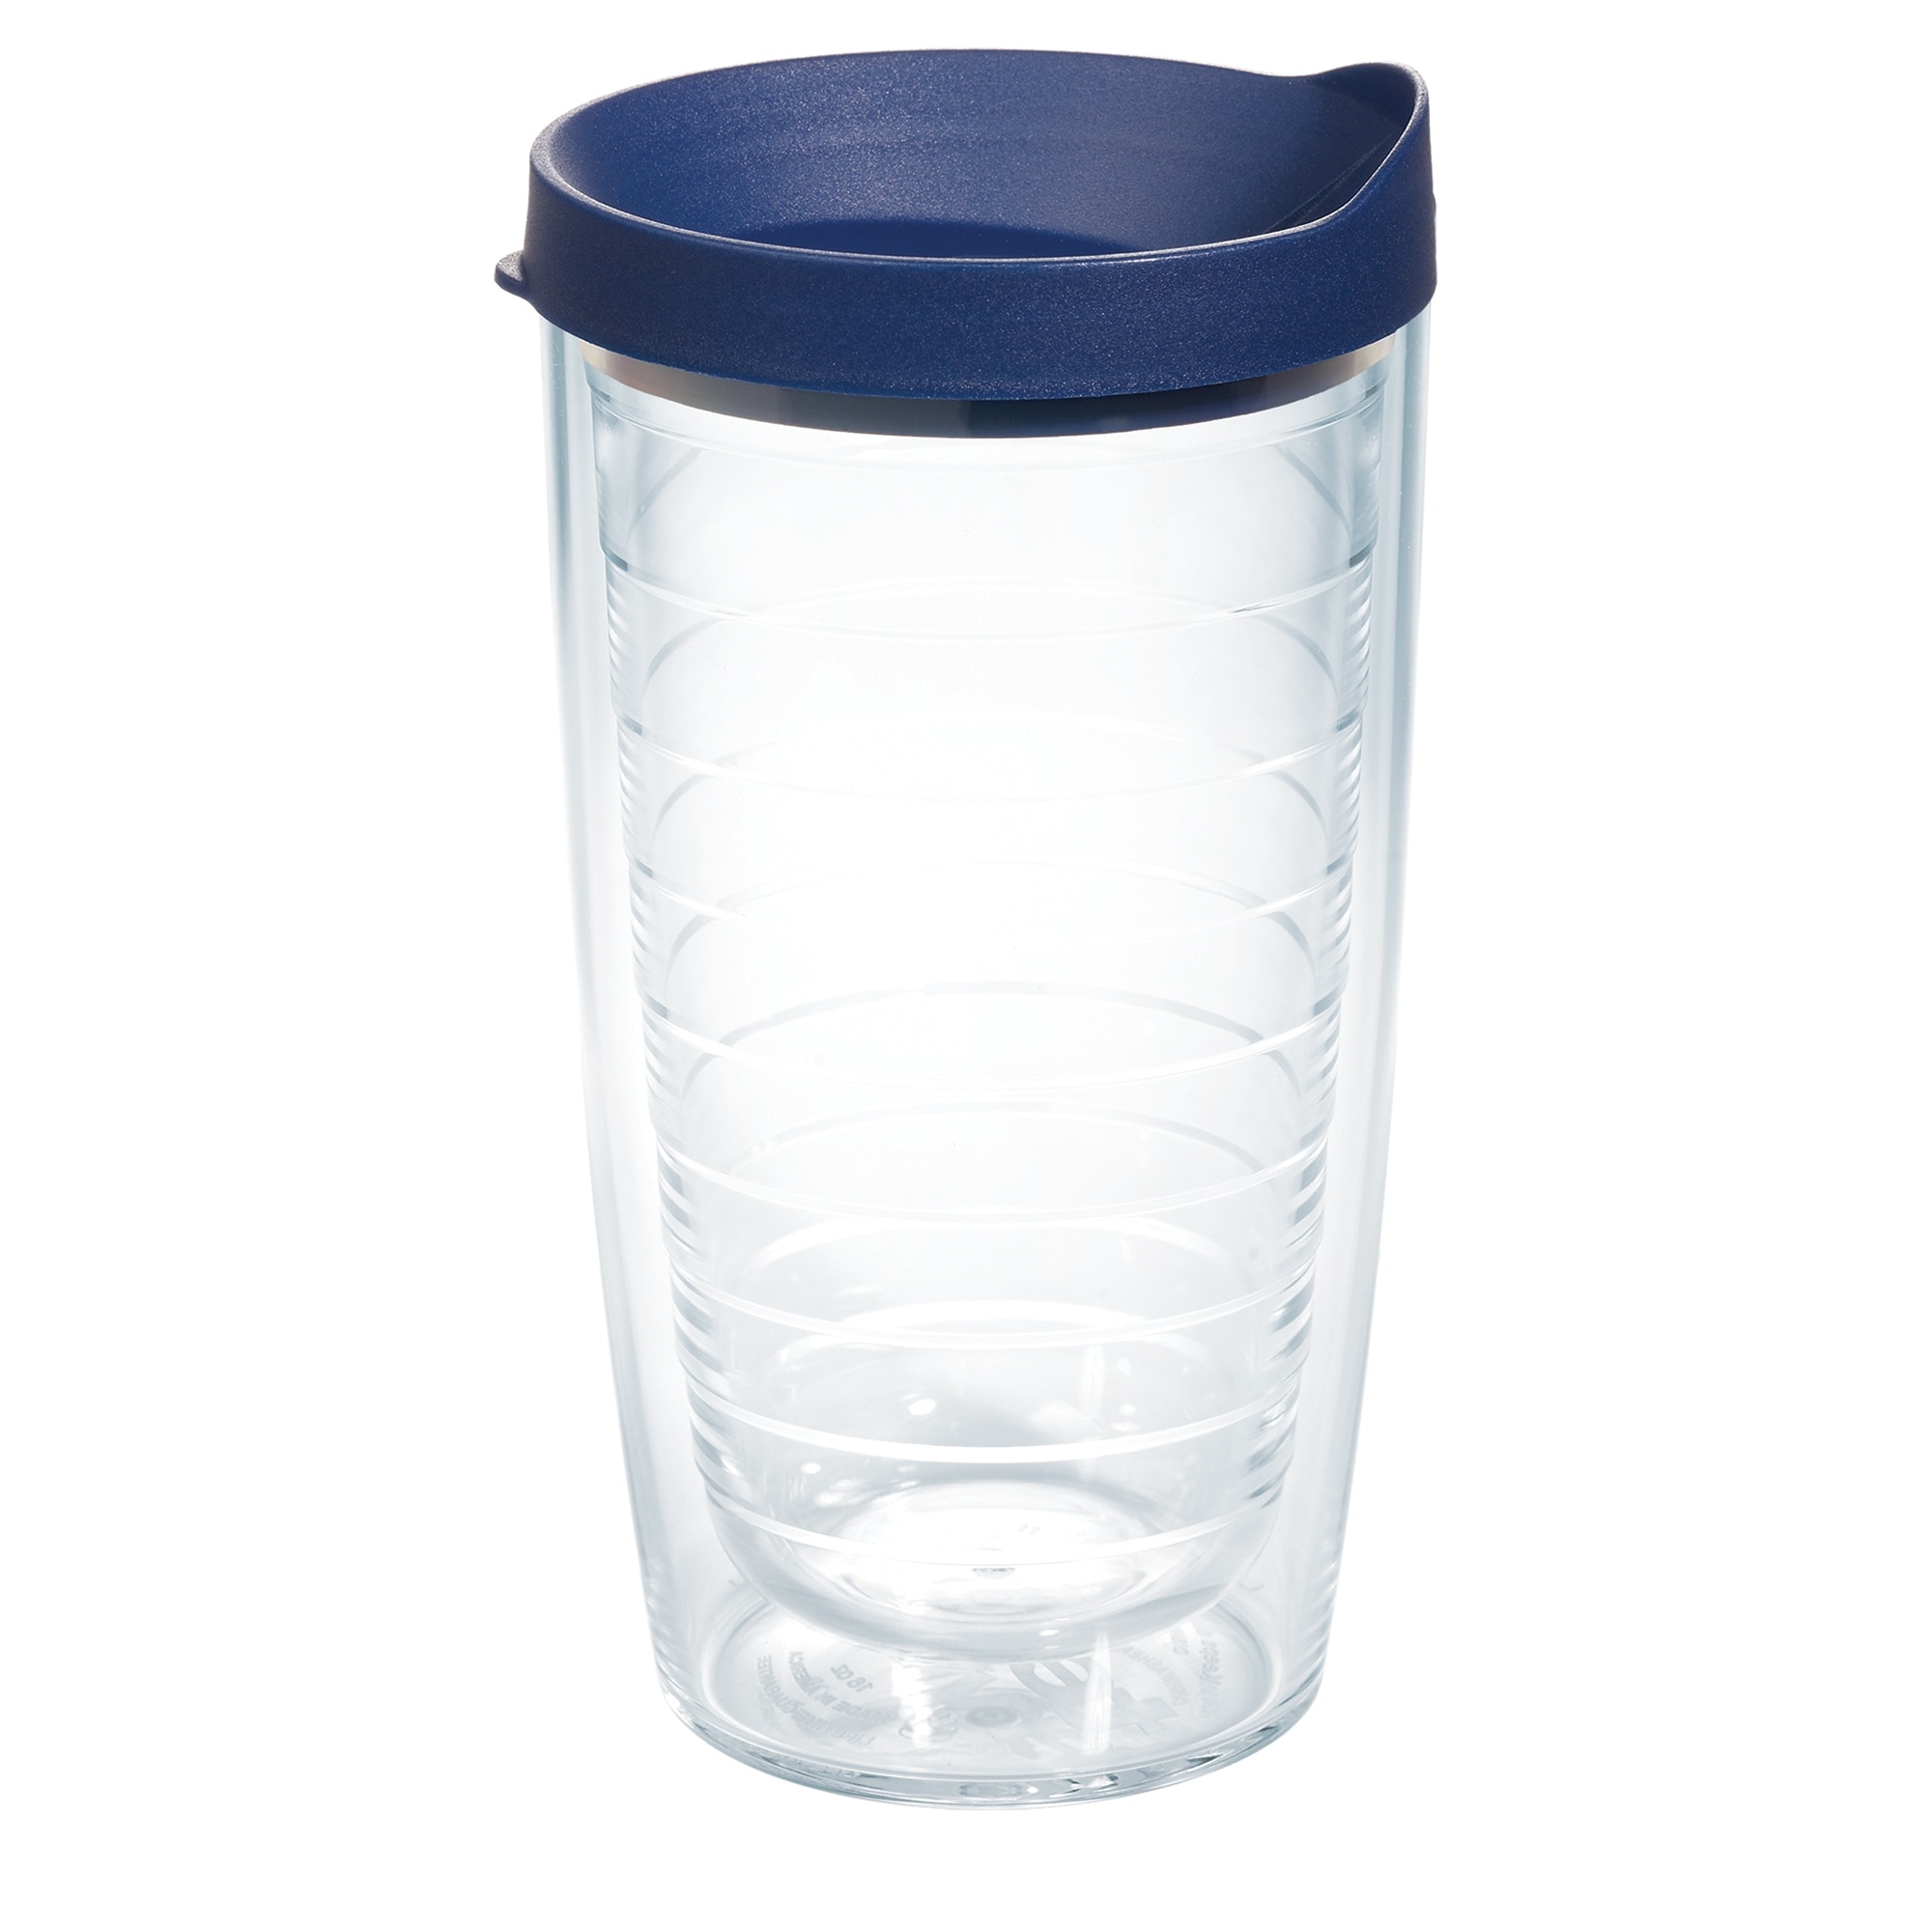 Tervis Clear & Colorful Lidded Made in USA Double Walled Insulated Travel Tumbler, Navy Lid